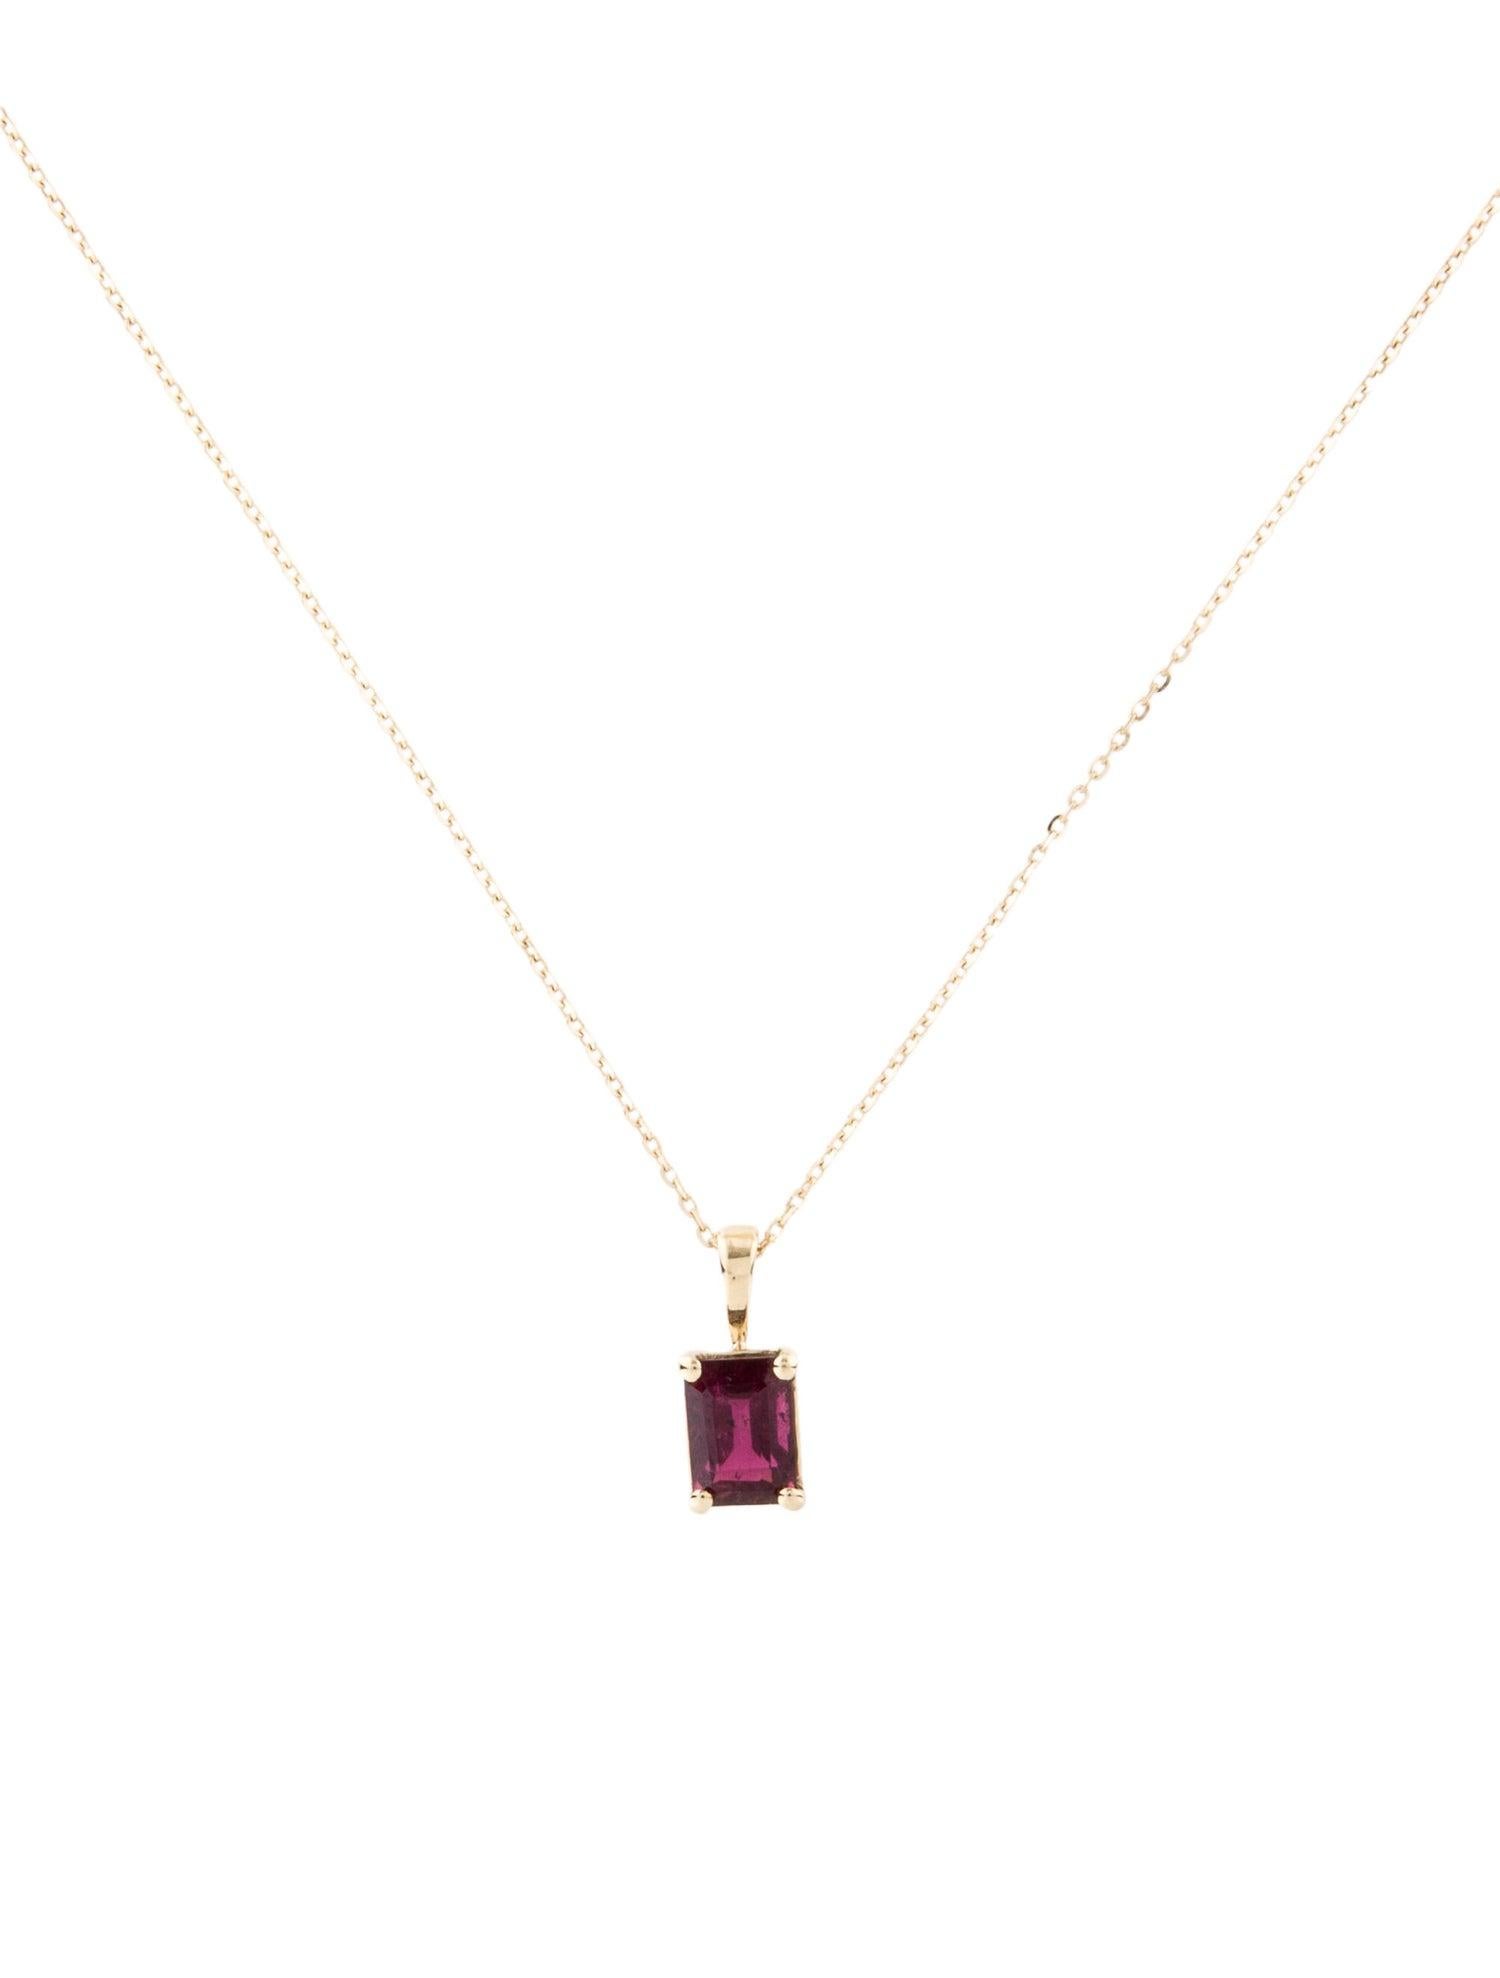 Presenting our stunning 14K Yellow Gold Rhodolite Pendant Necklace, featuring a 1.07 carat cut cornered rectangular step cut Rhodolite. This fine jewelry piece combines the warmth of 14K yellow gold with the unique allure of a red and pink